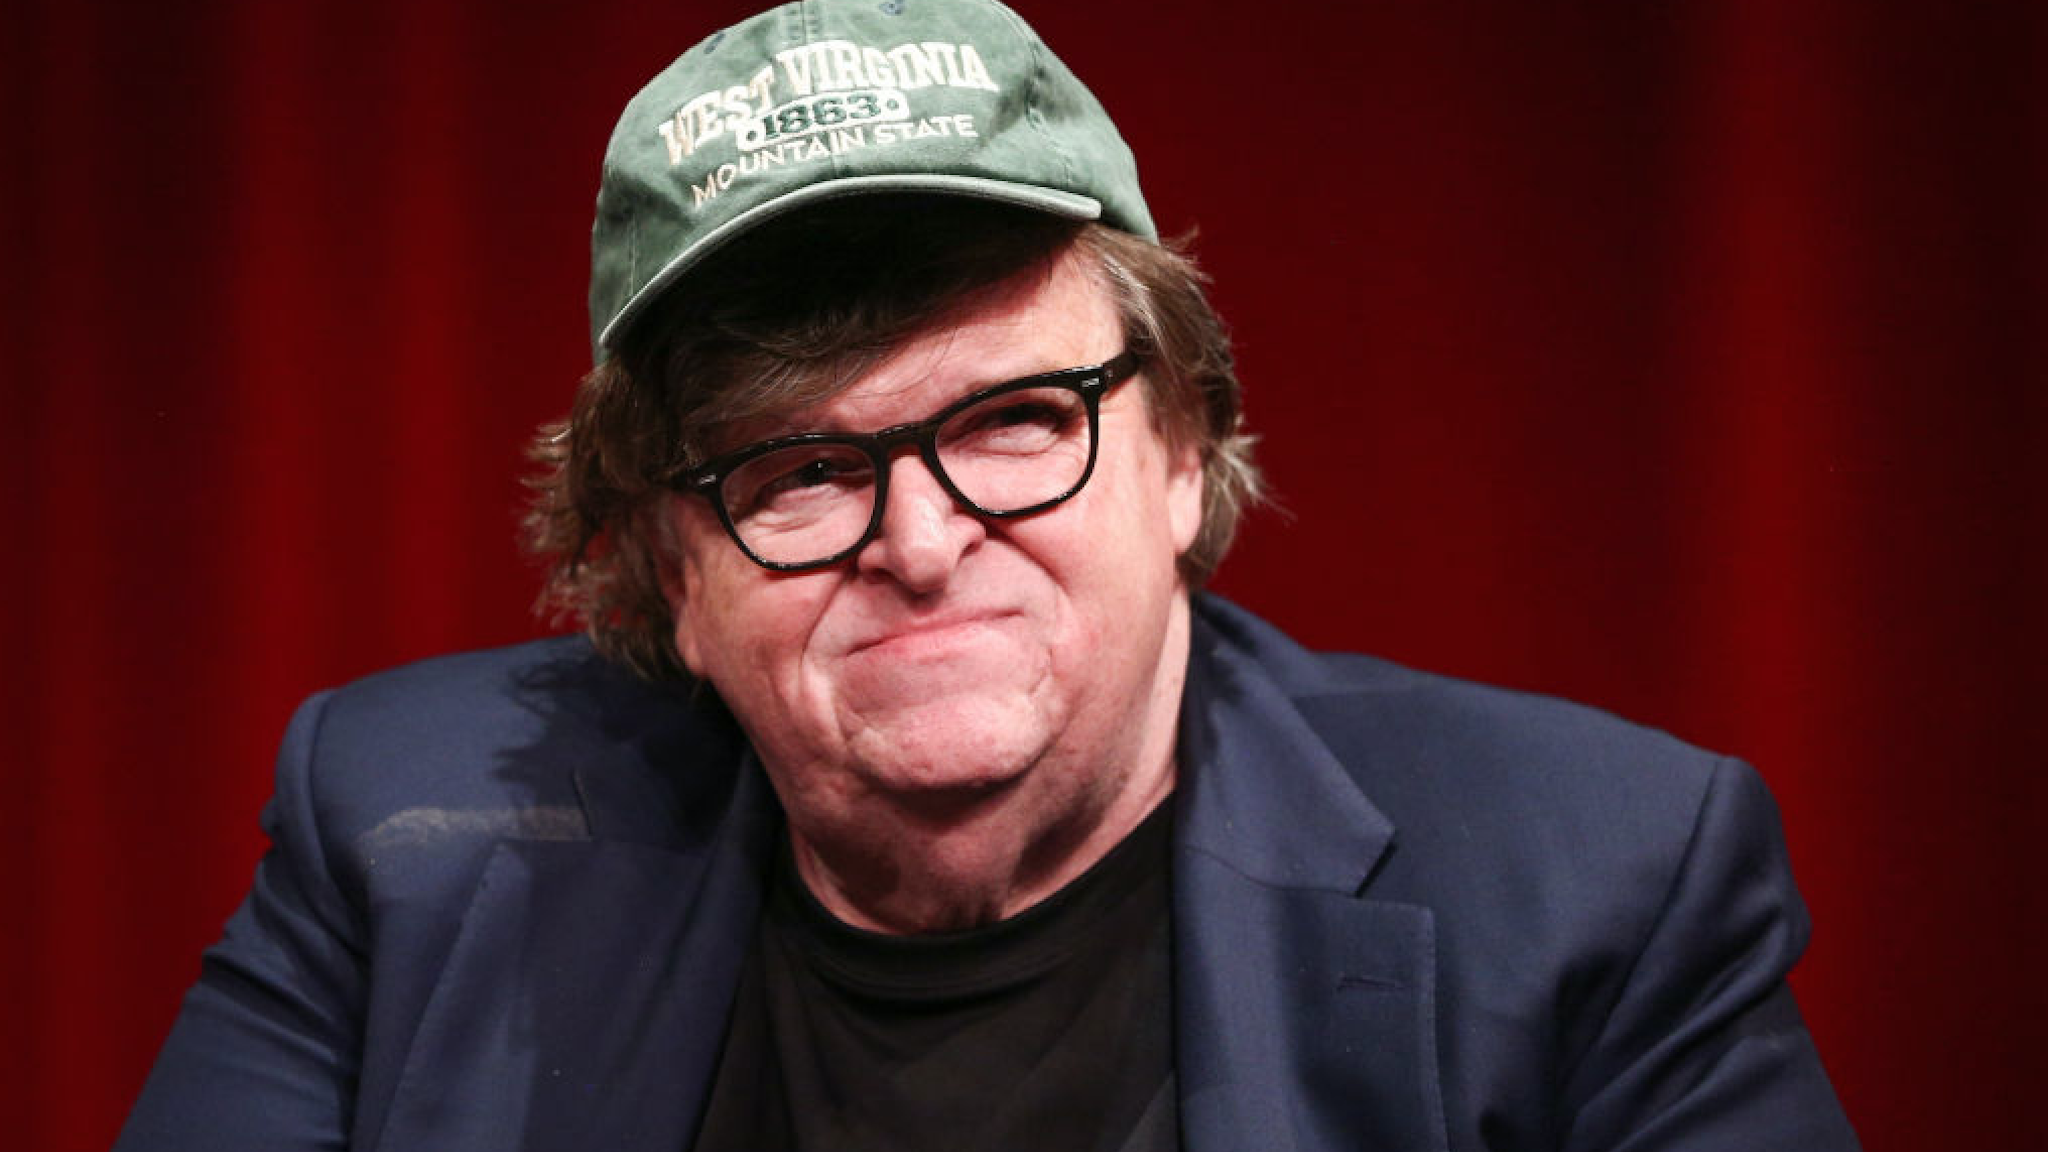 Michael Moore attends the premiere of Briarcliff Entertainment's "Fahrenheit 11/9" at Samuel Goldwyn Theater on September 19, 2018 in Beverly Hills, California.